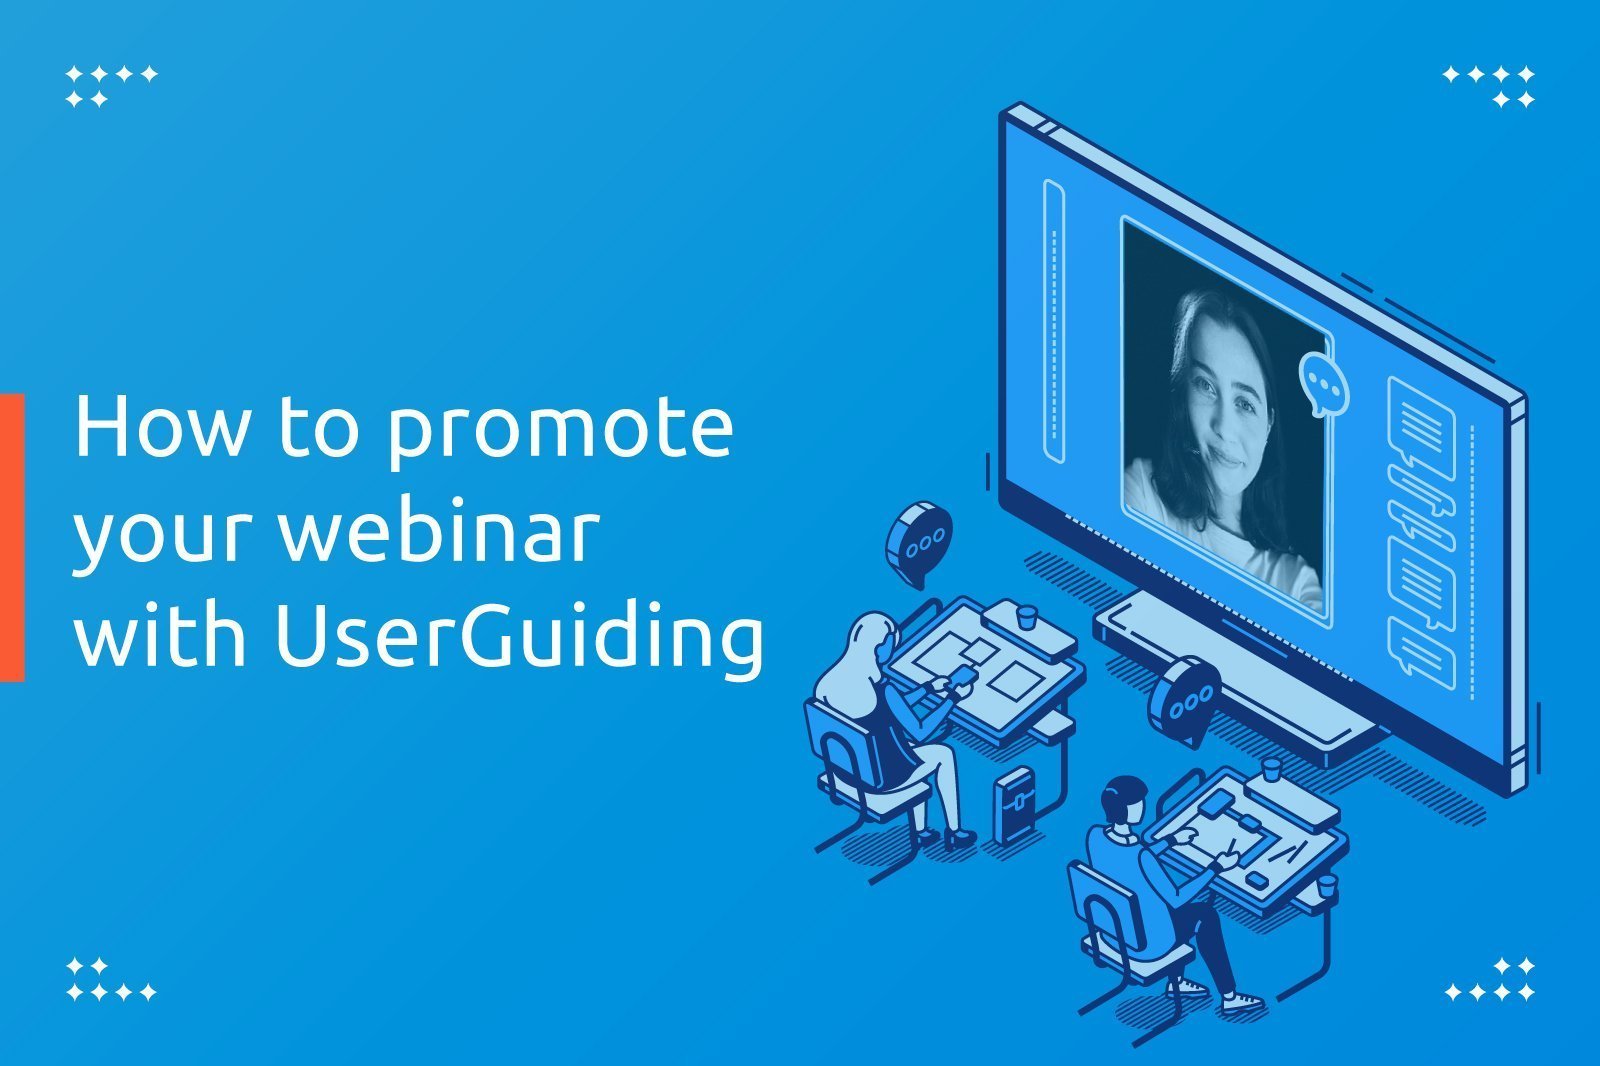 How to promote a webinar with UserGuiding